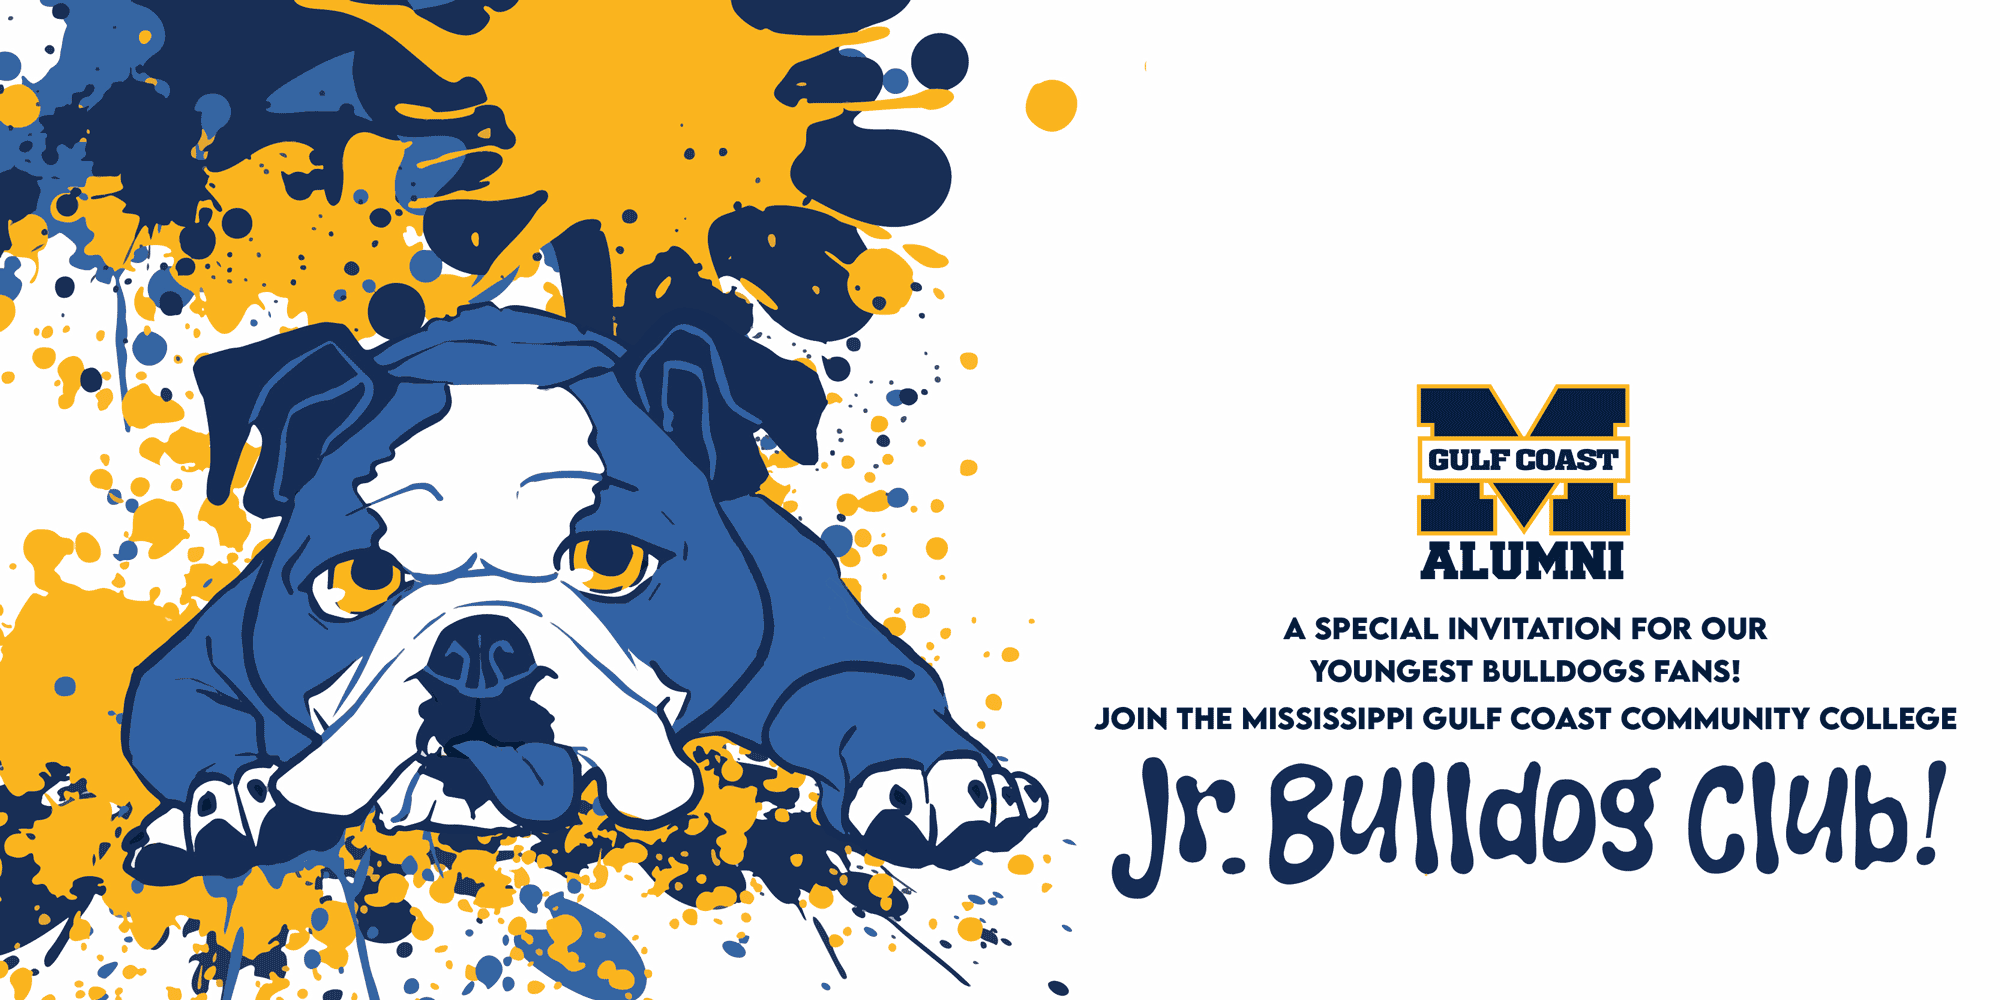 Graphic of a cute cartoon bulldog with blue and gold paint splaters behind him. MGCCC Alumni Association has a special invitation for our youngest bulldogs fans! Join the Mississippi Gulf Coast Community College Jr. Bulldog Club!